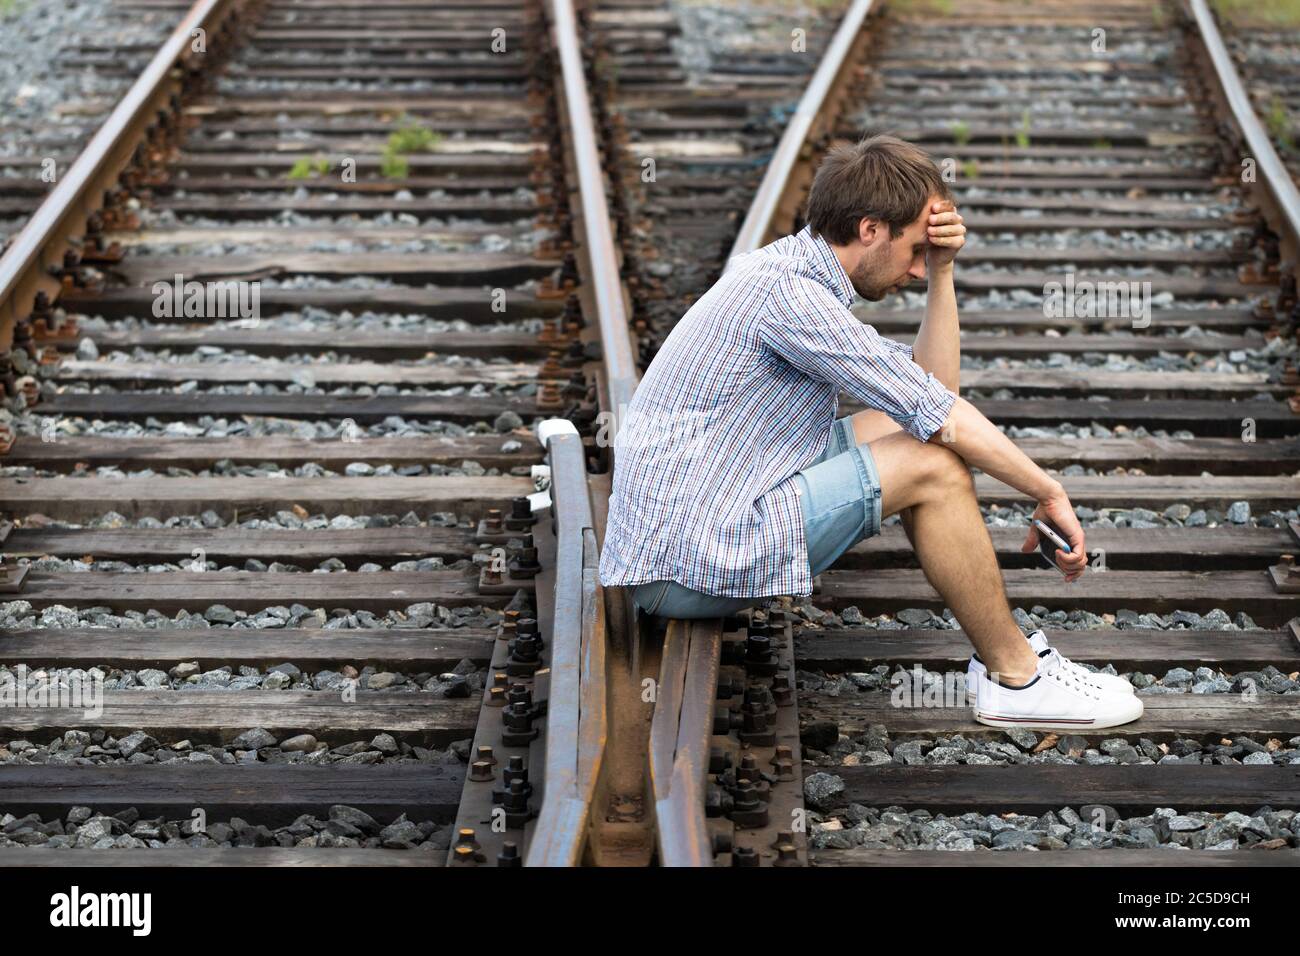 Depressed man sitting on the railroad tracks, holding phone, makes a difficult decision to live in the past or change his future. Changing life path c Stock Photo